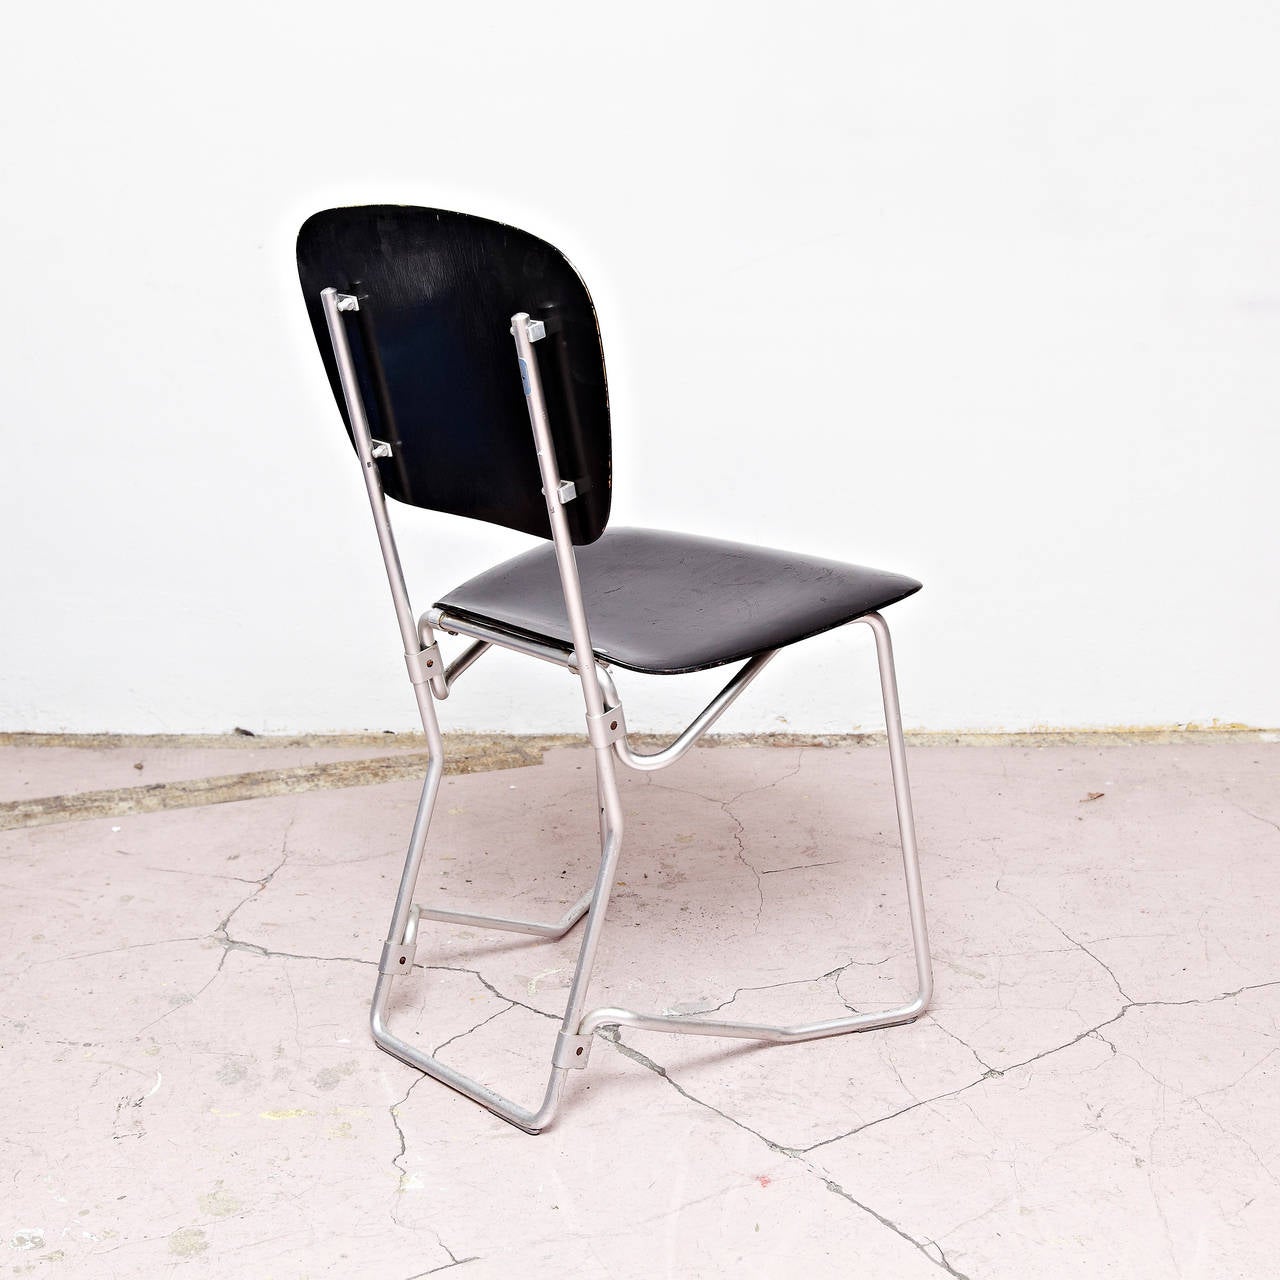 Stackable Aluflex chairs designed by Armin Wirth
Manufactured by Aluflex, Switzerland, circa 1950.  

In good original condition, with minor wear consistent with age and use, preserving a beautiful patina.

2 chairs available